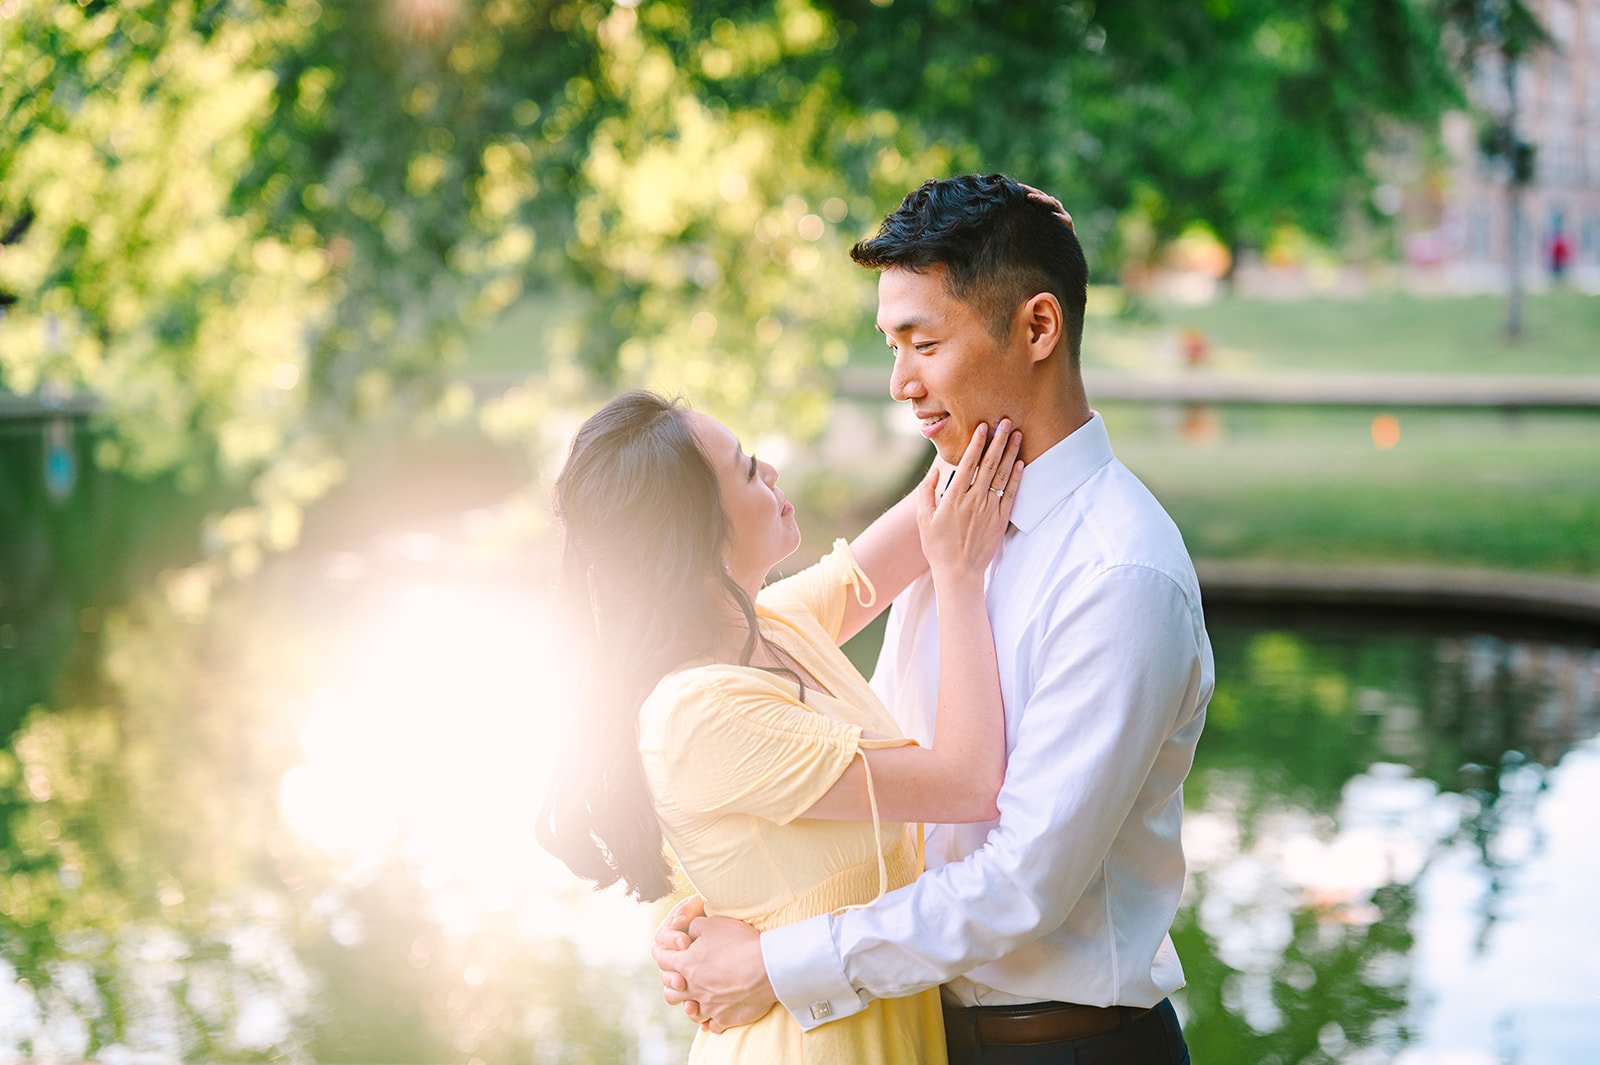 allegheny commons park engagement session